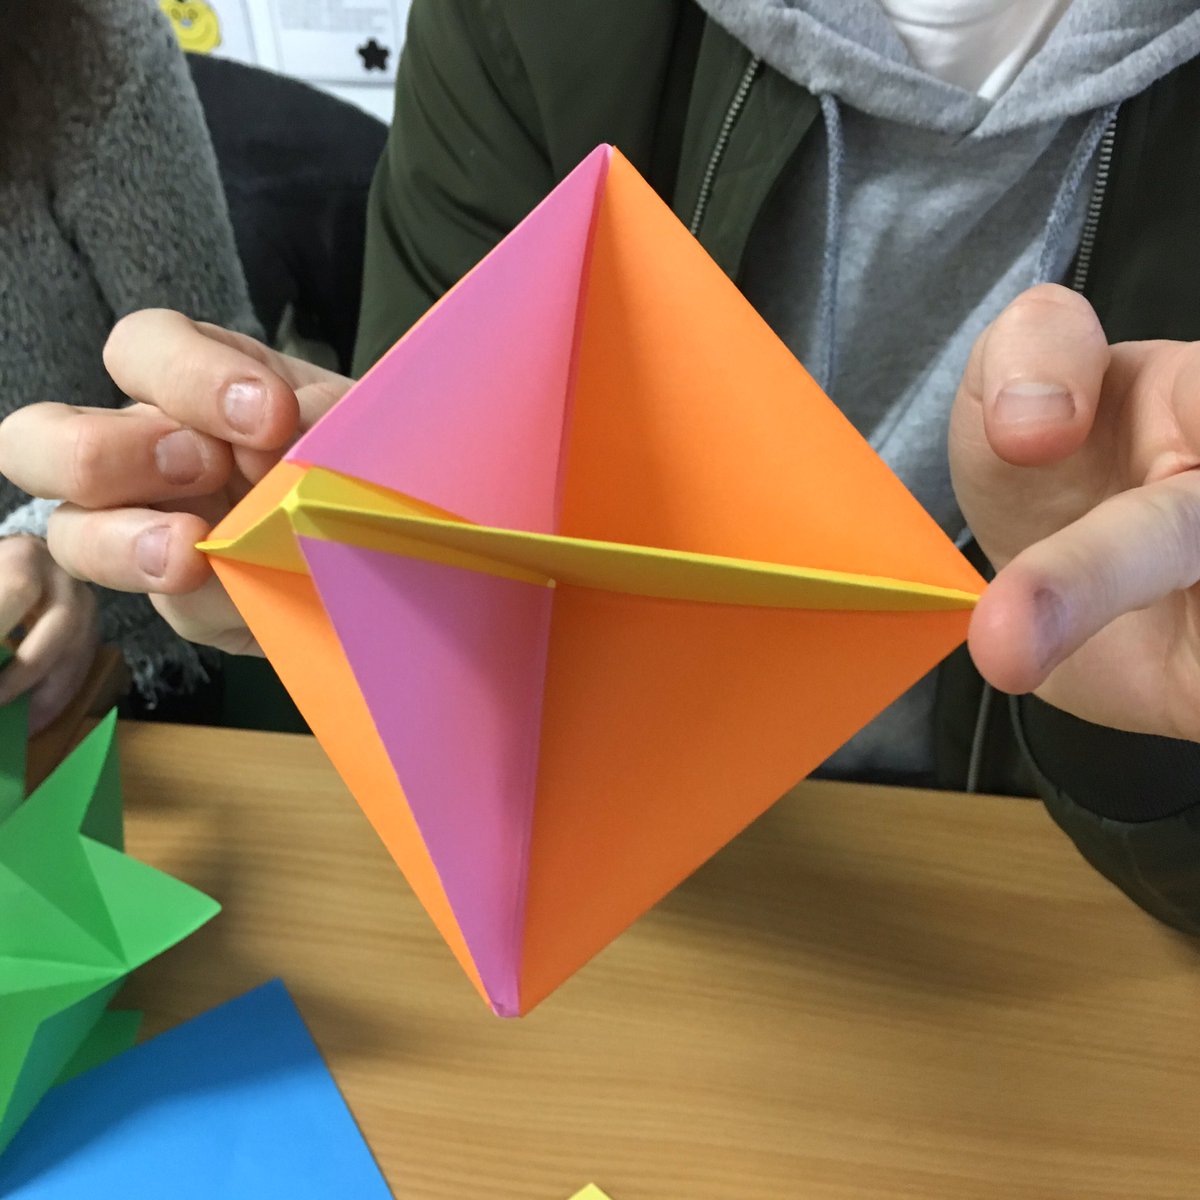 6) Or how about a tower of skeletal octahedra instead? They’re a great challenge to put together – although you might need an extra pair of hands! Good video instructions from  @nrichmaths here:  https://wild.maths.org/skeletal-octahedron #3DMaths  #HandsOnMaths  #LockdownMaths  #ArtfulMaths